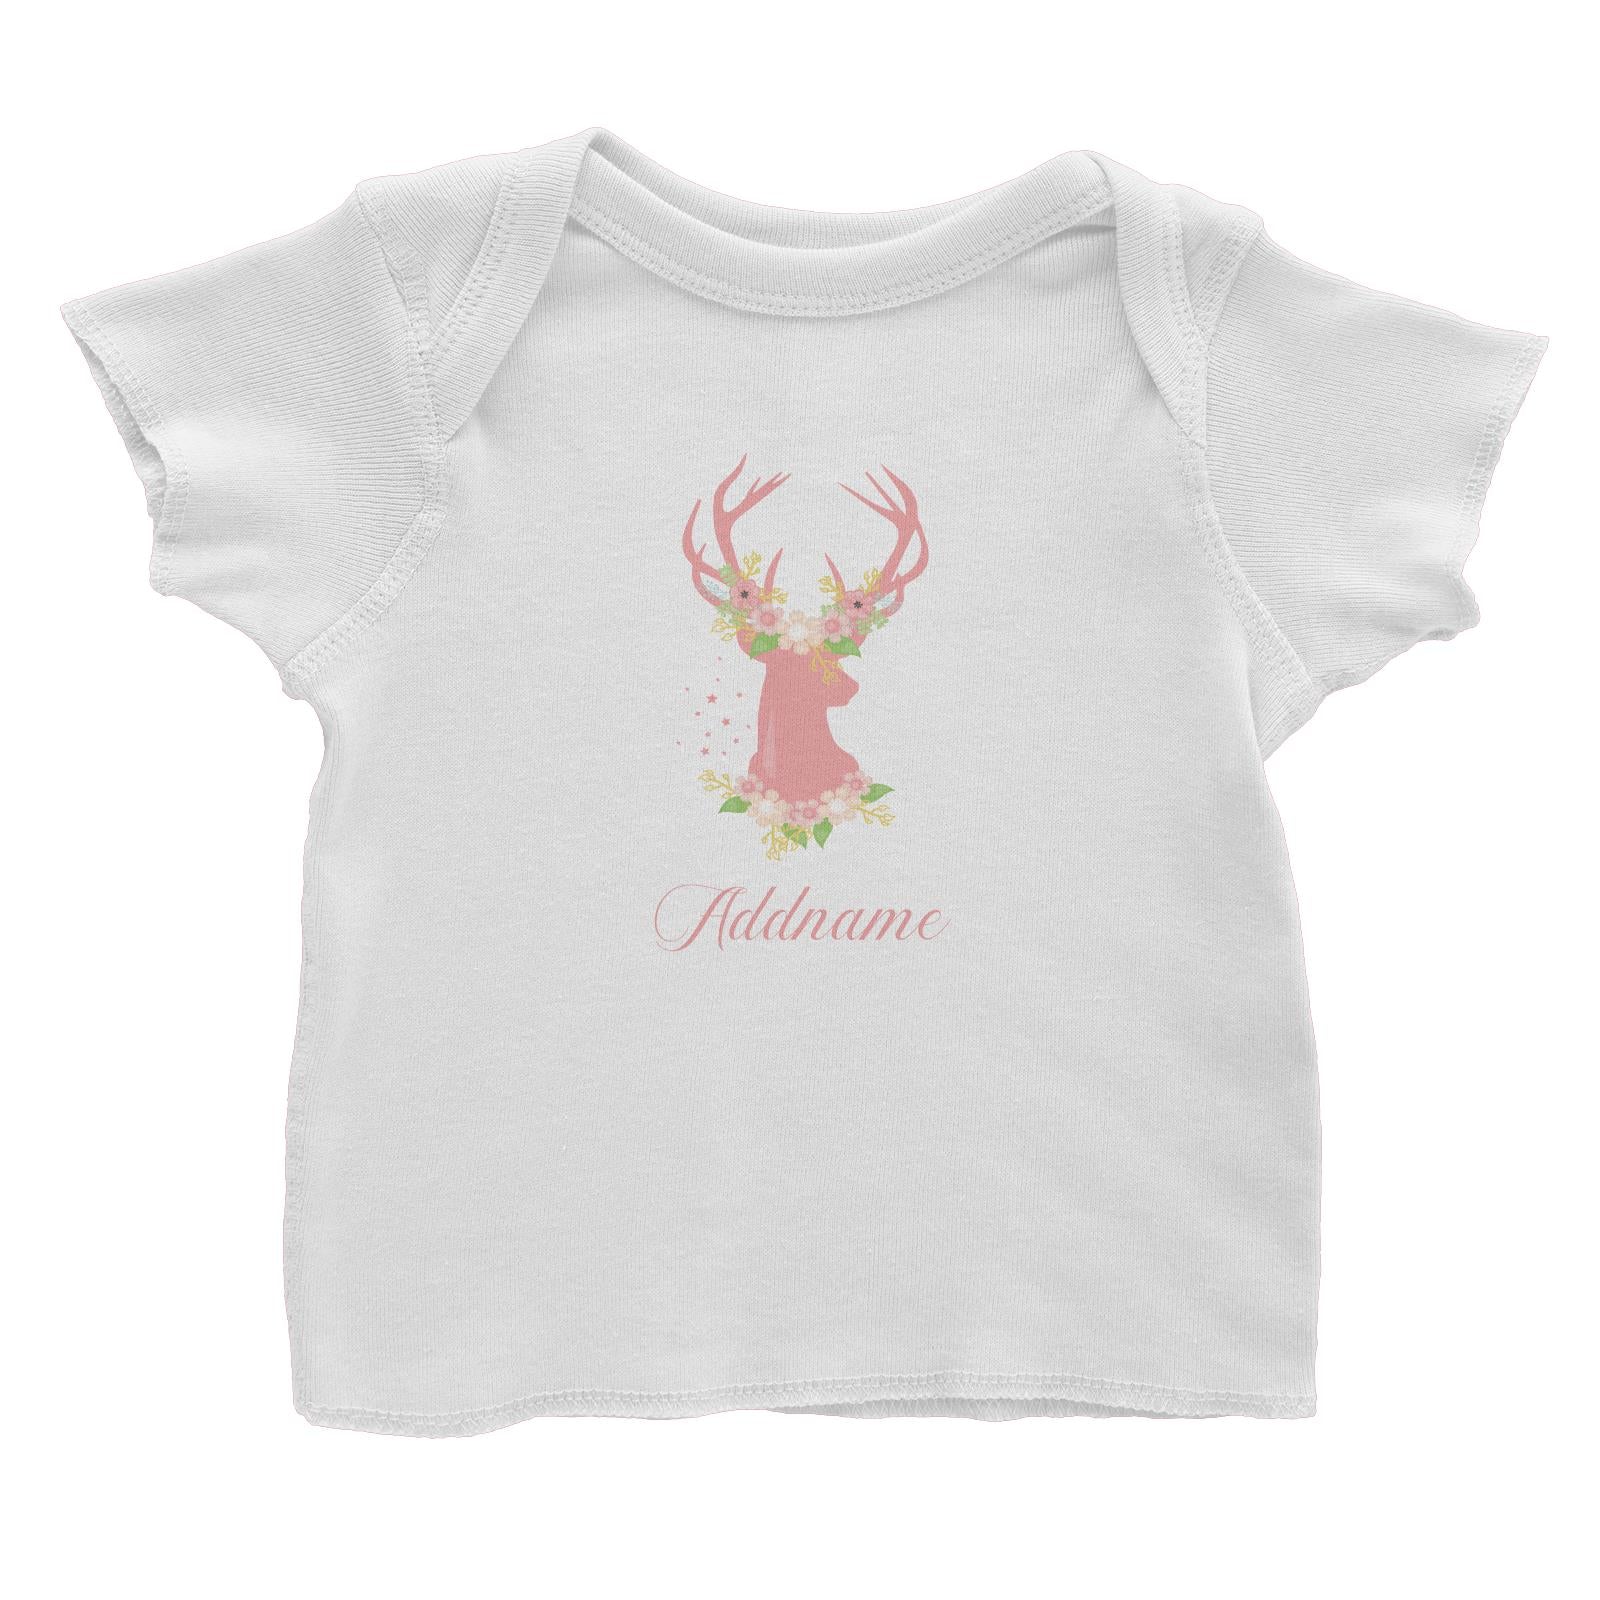 Basic Family Series Pastel Deer Pink Deer With Flower Addname Baby T-Shirt